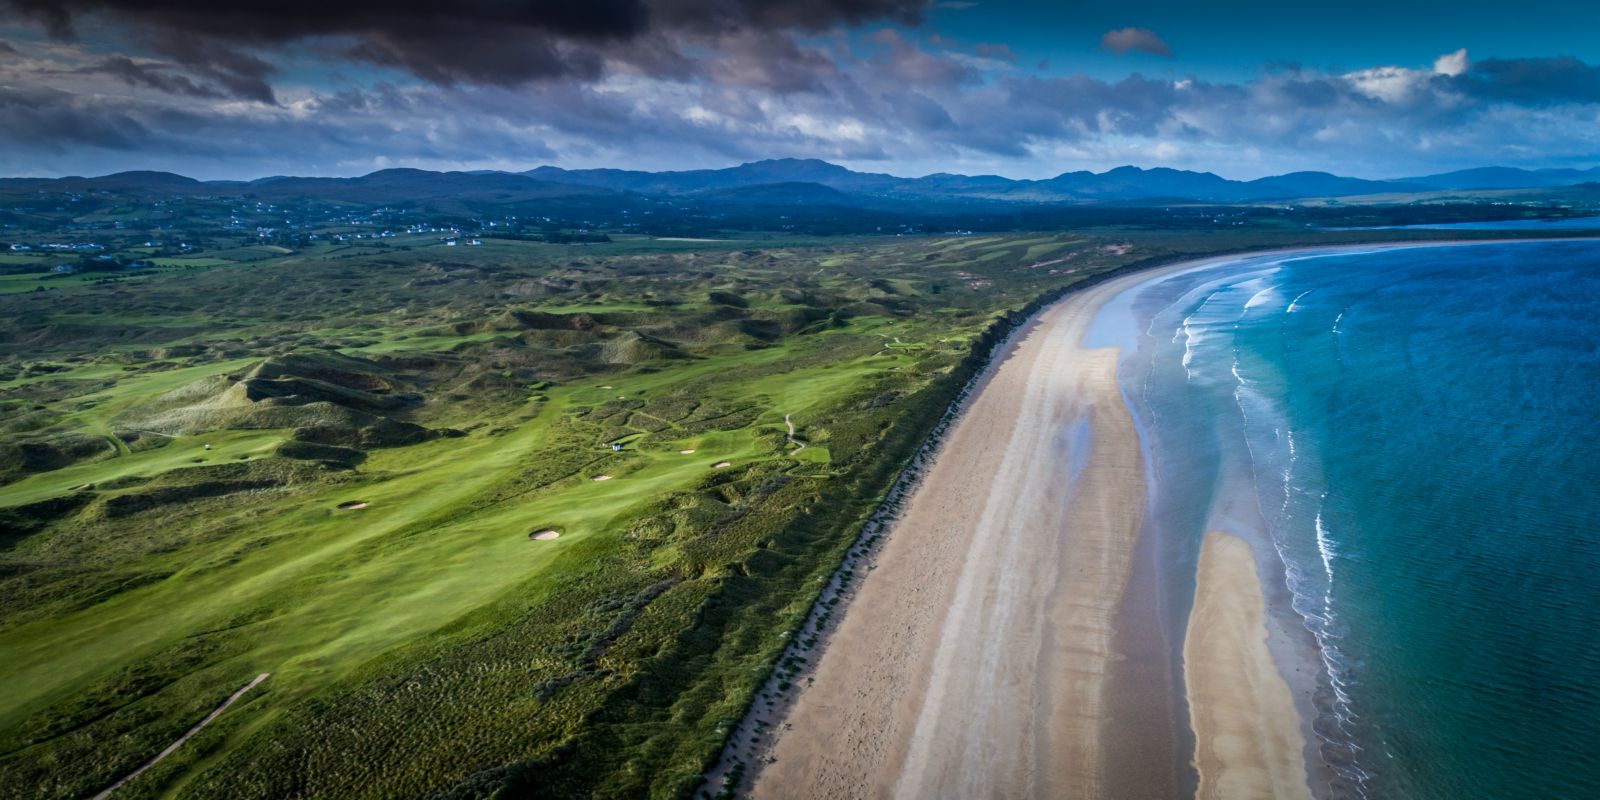 Aerial view of the ocean contrasting with the beach and golf courses at Rosapenna Golf Resort, Ireland